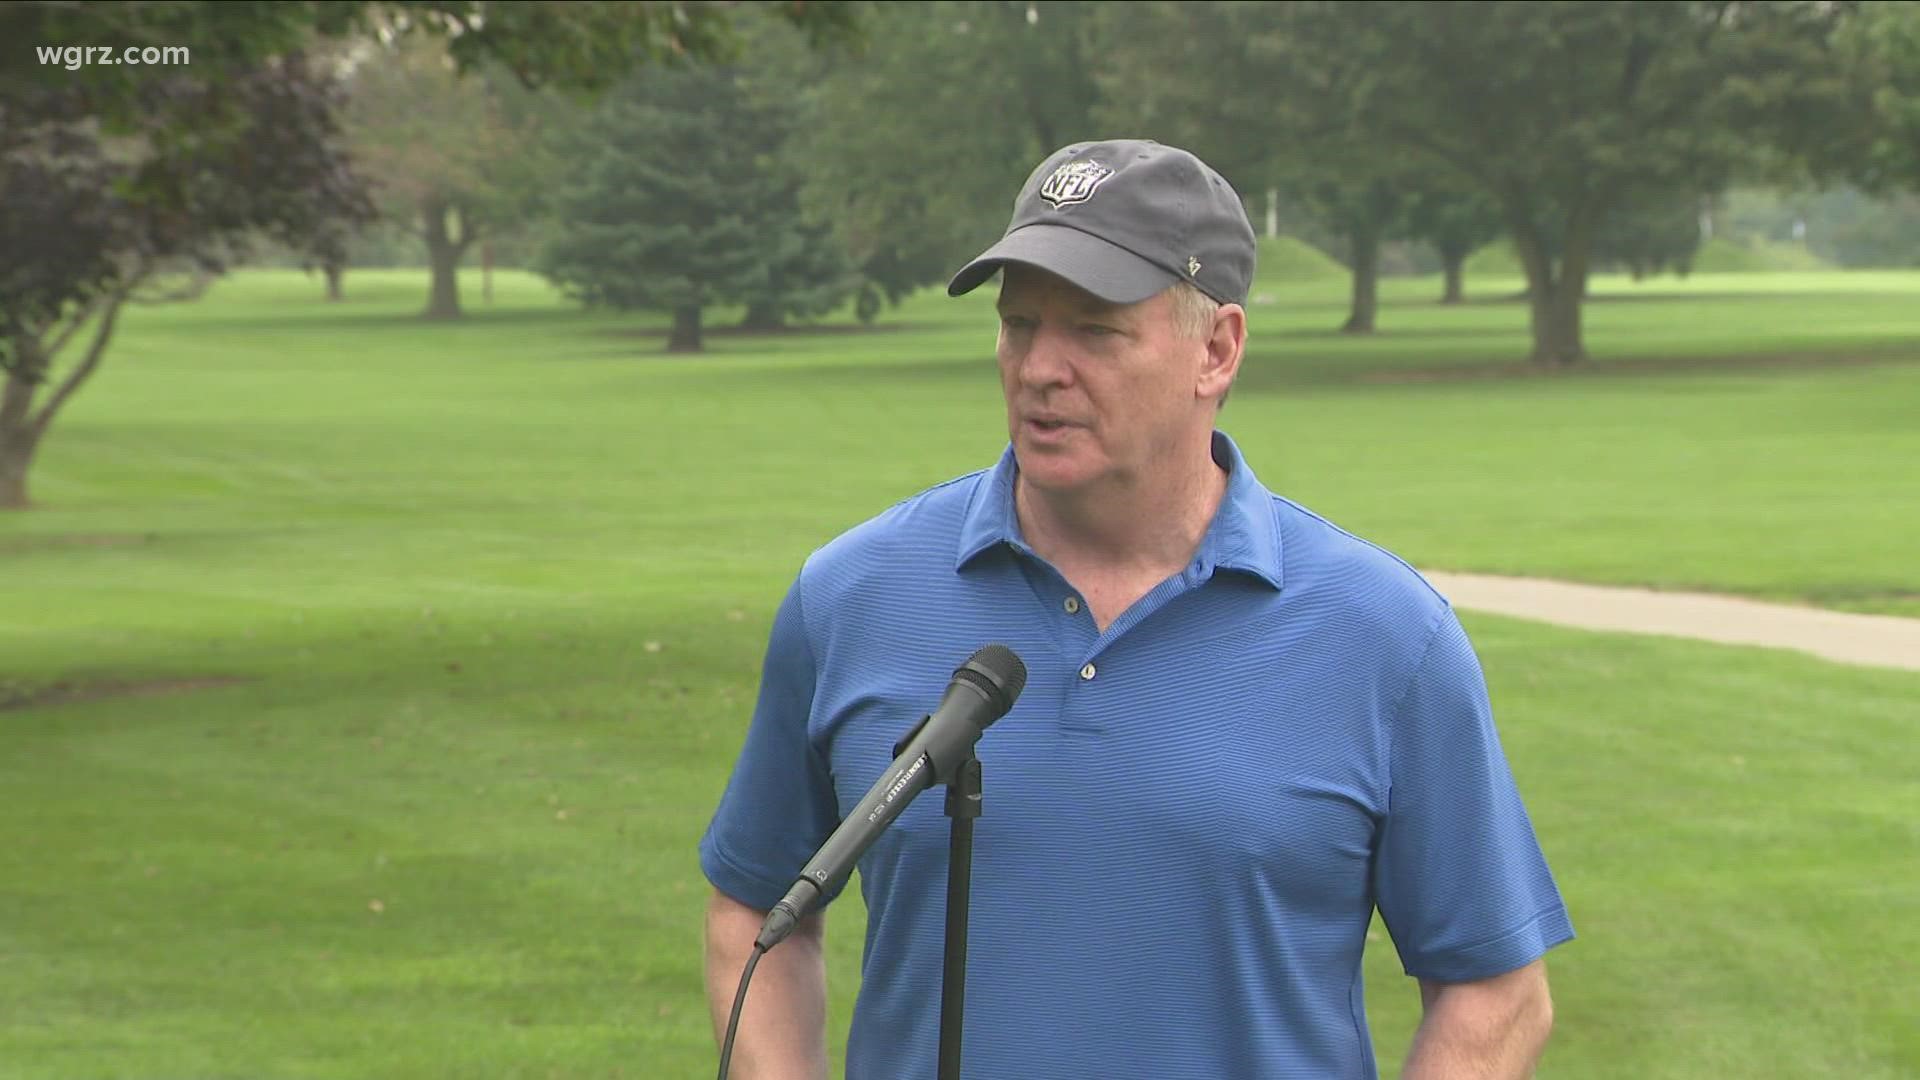 The Bills were off today, but Jim Kelly's annual celebration golf classic was held today. NFL Commissioner Roger Goodell was there and was asked about the stadium.